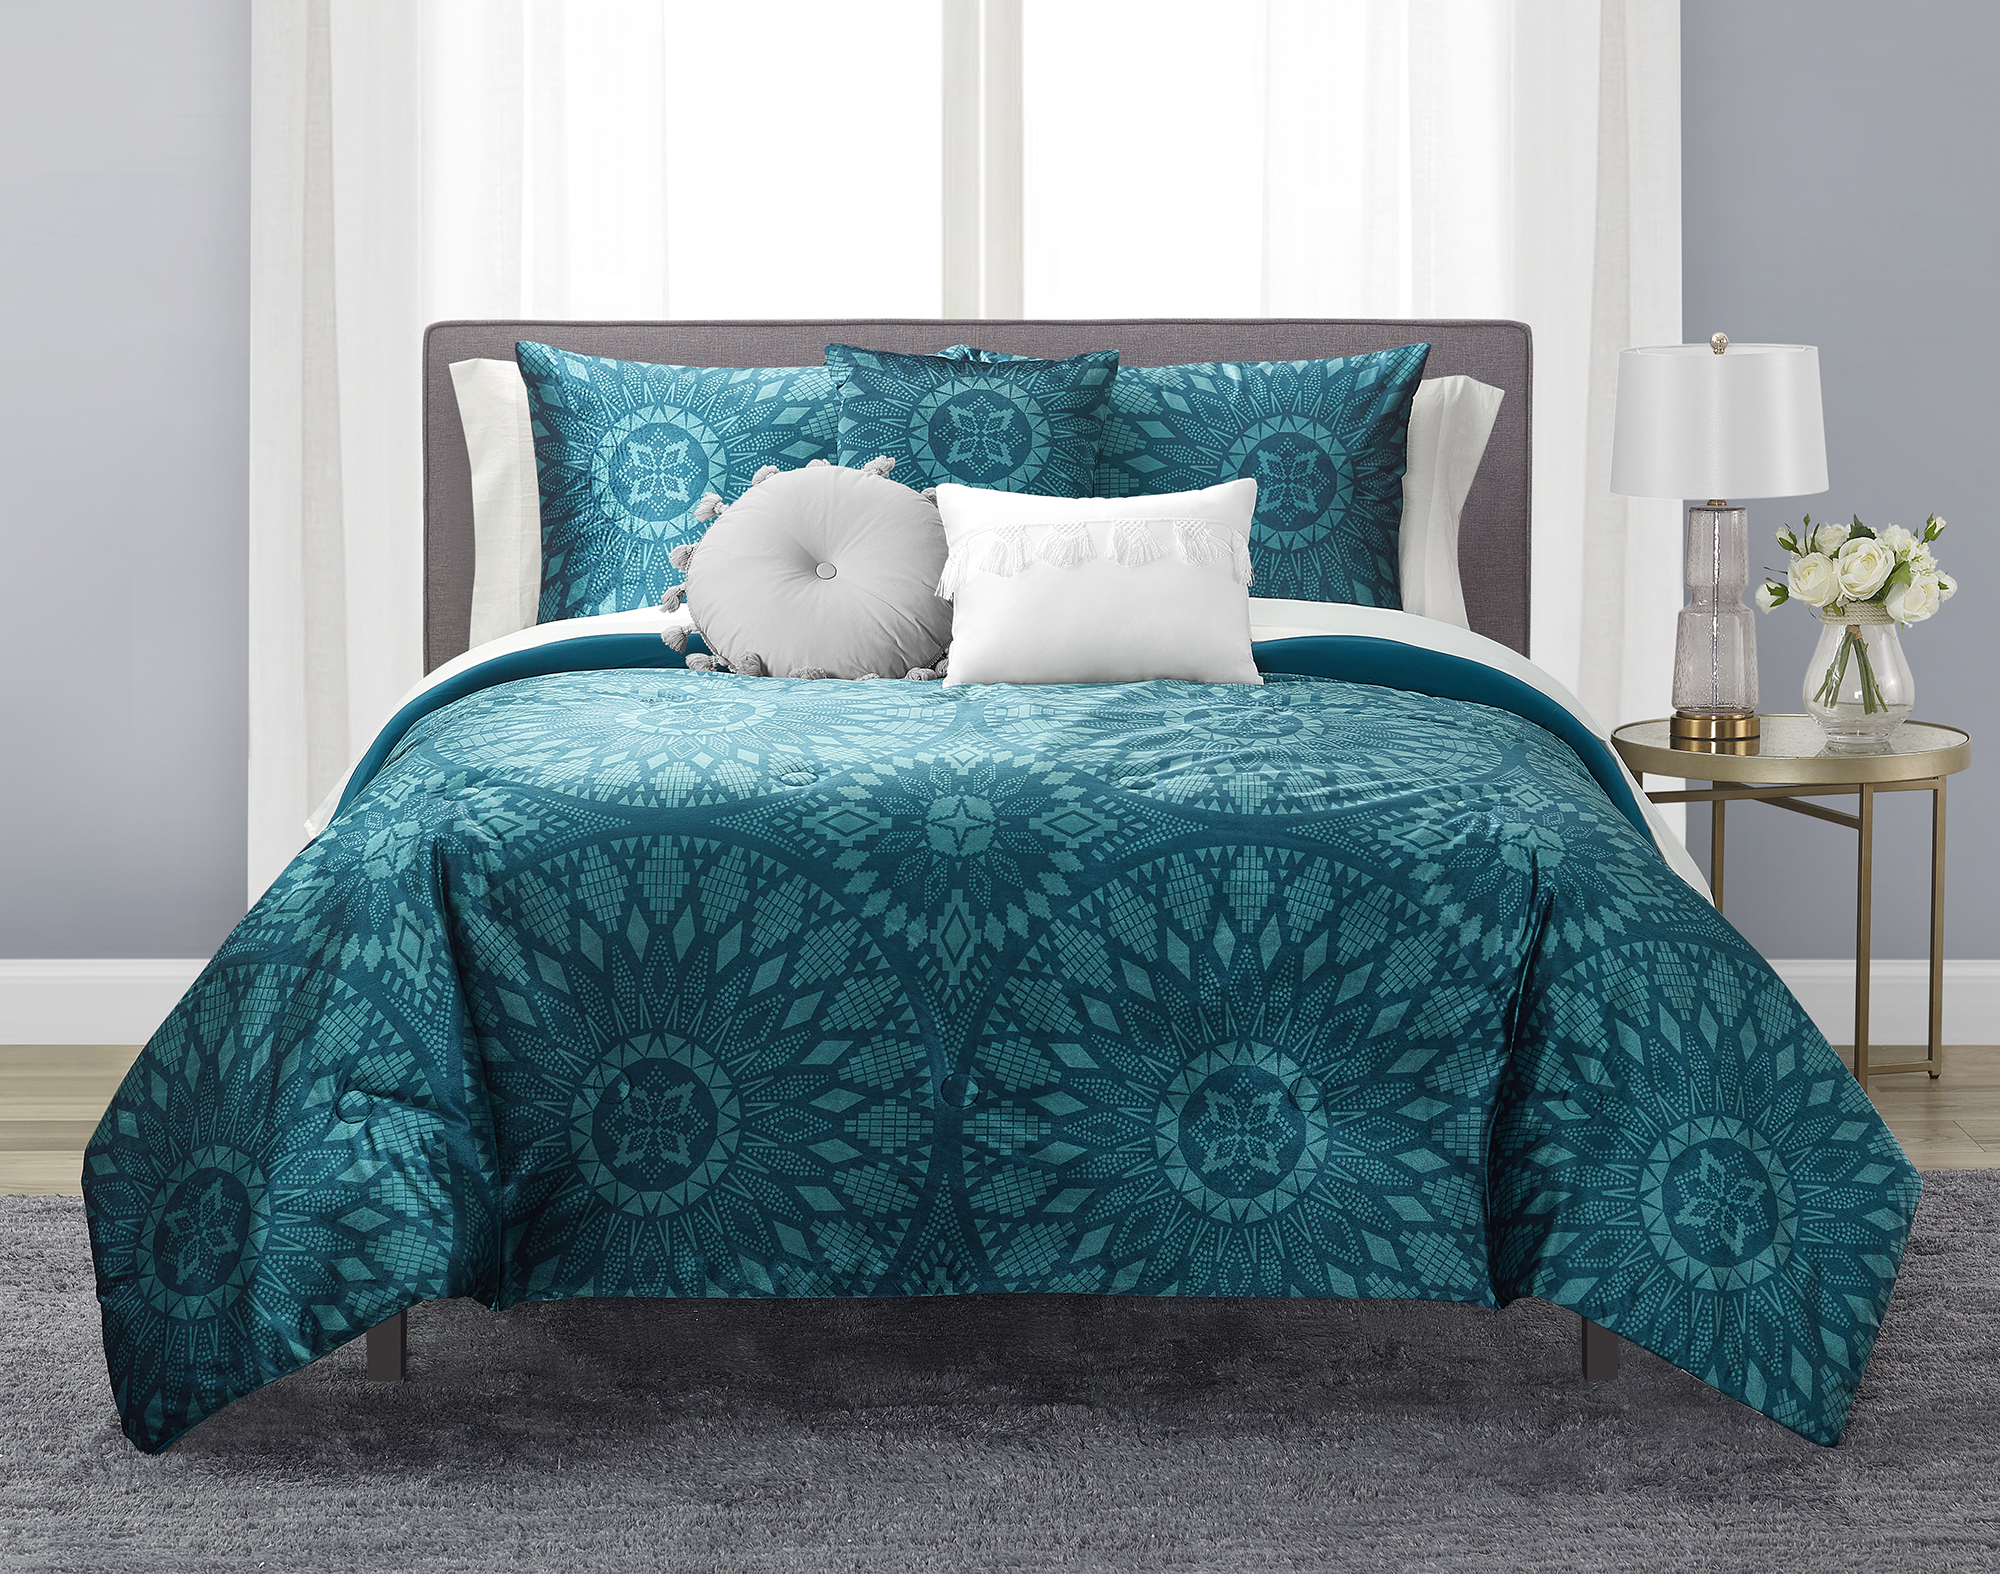 Mainstays Teal Velvet Medallion 10 Piece Bed in a Bag with Sheets and 3 DecPillows, Full - image 1 of 12